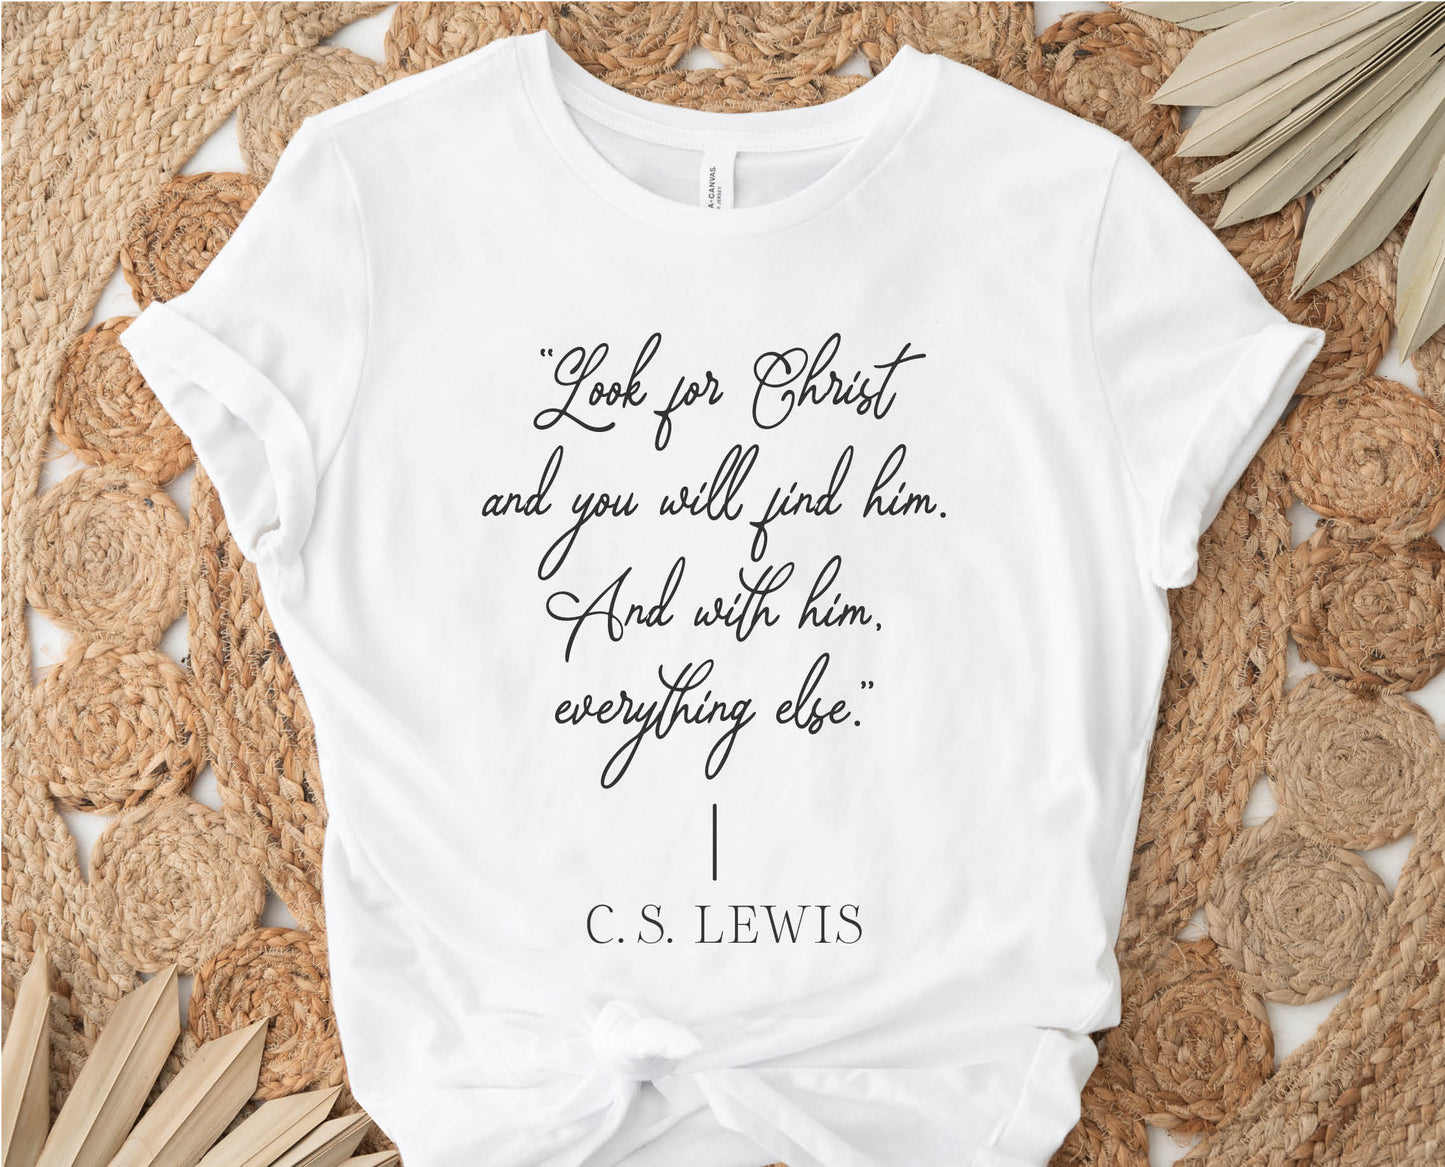 Soft quality white t-shirt with British writer Narnia author C.S. Lewis quote "Look for Christ and you will find him. And with him, everything else."  printed in black vintage script - Christian aesthetic unisex tee shirt design for women